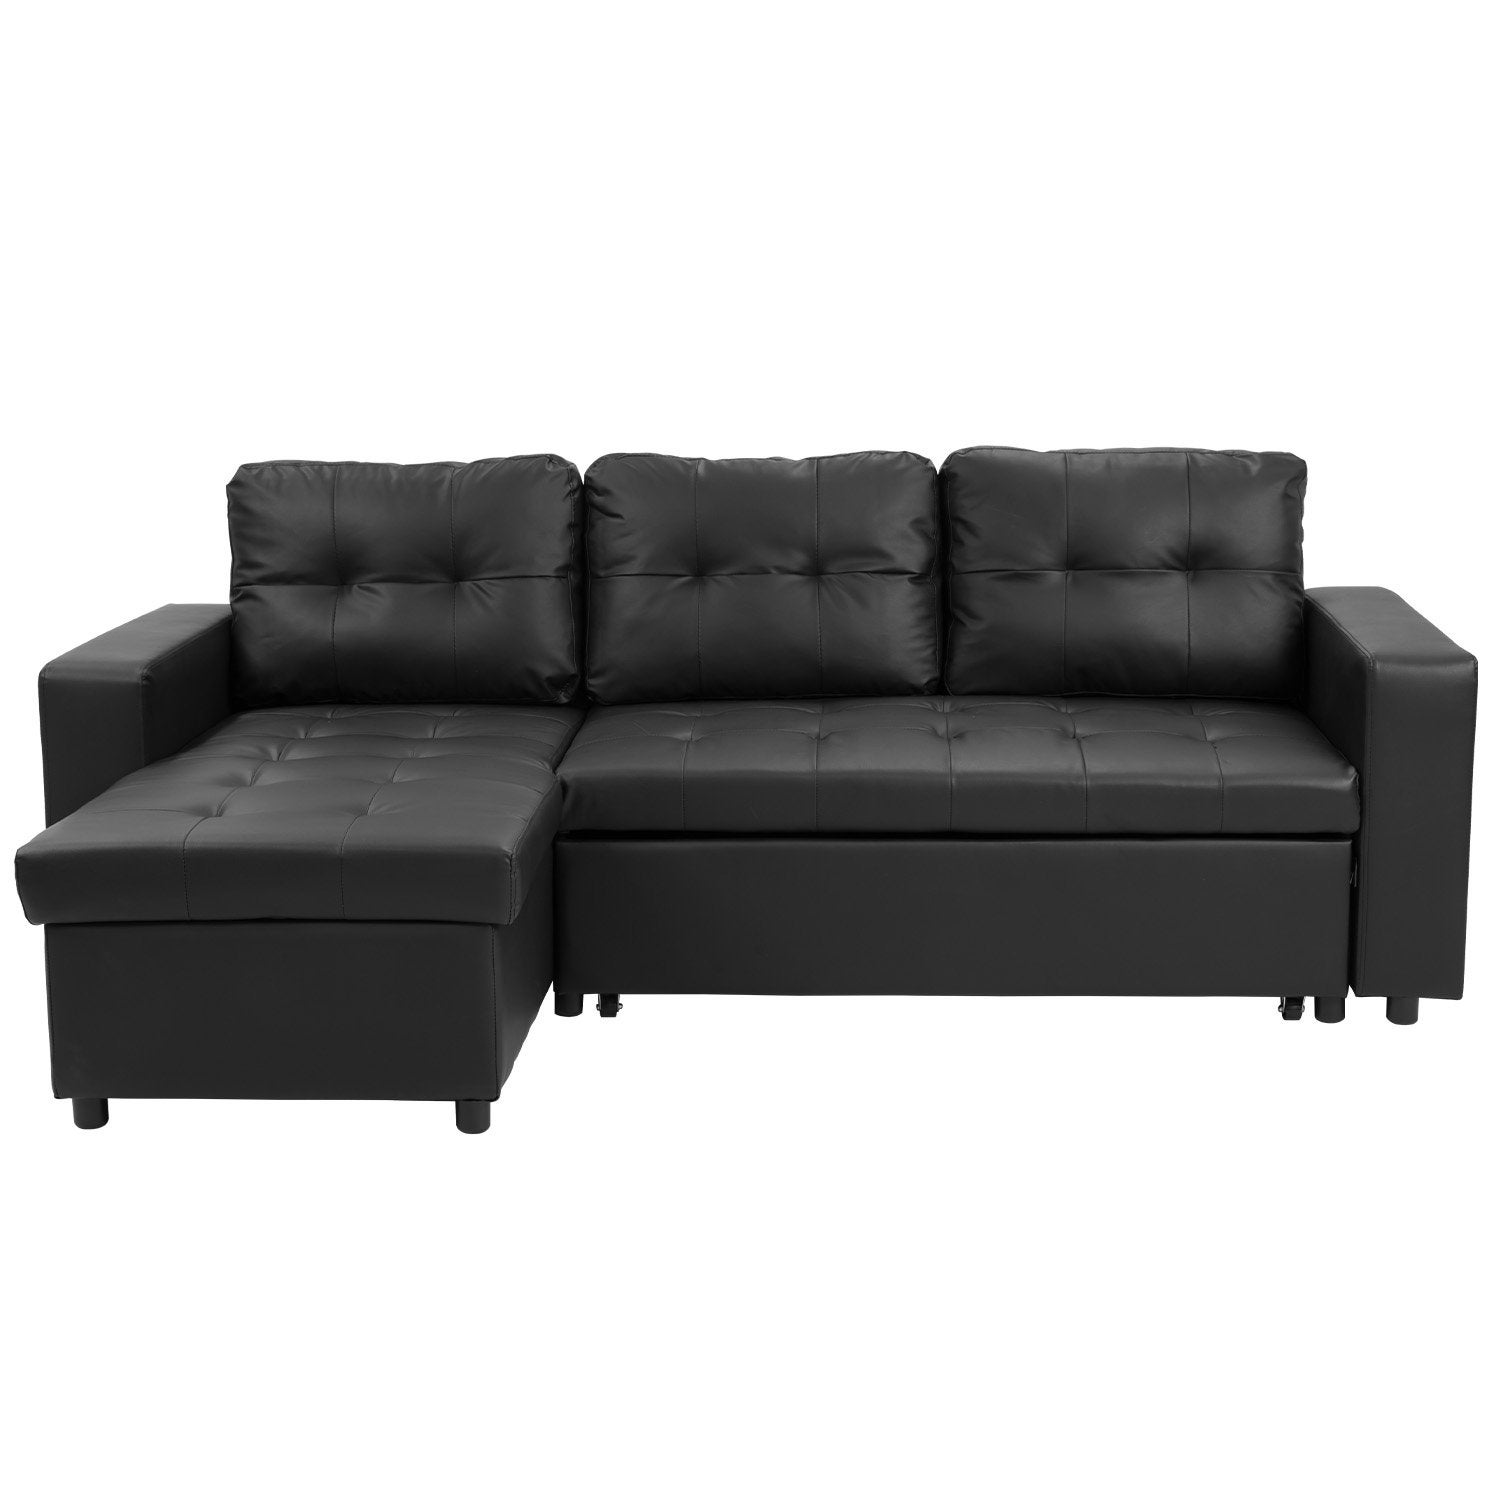 Sarantino 3-Seater Corner Sofa Bed Storage Chaise Couch Faux Leather - Black